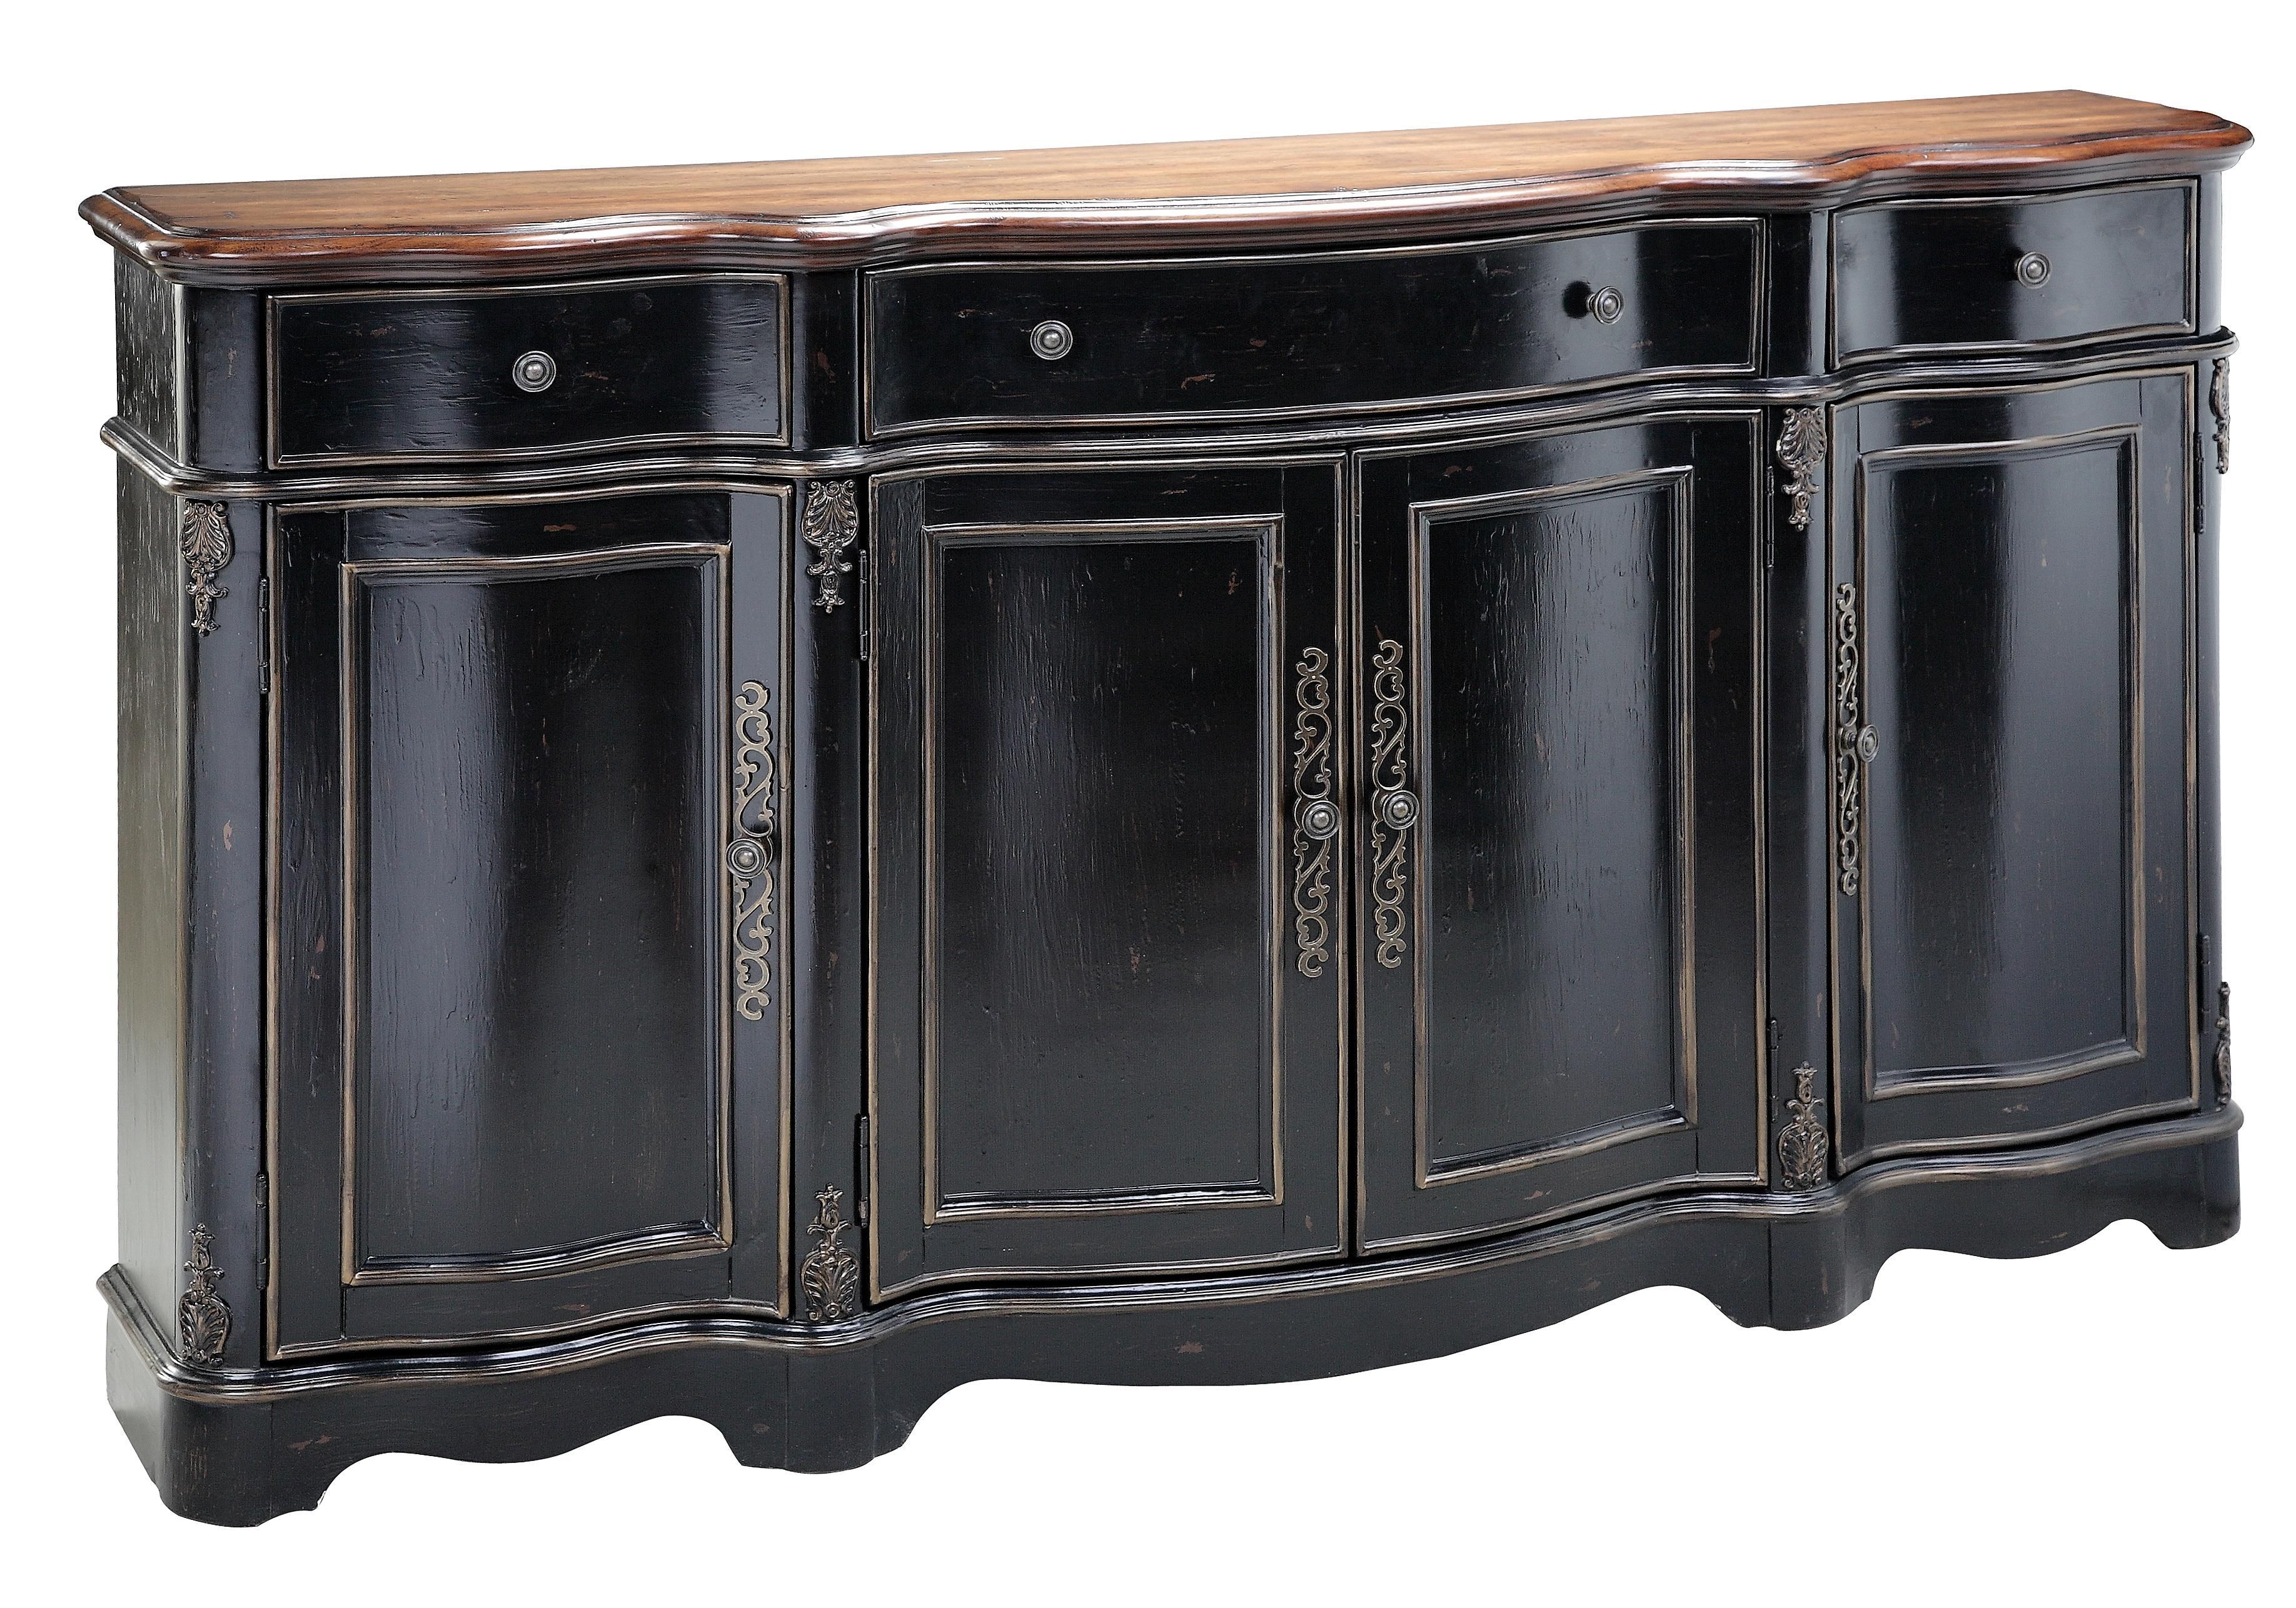 Credenzas 4 Door Black Credenza With Wood Topstein World Within Knoxville Sideboards (View 6 of 30)